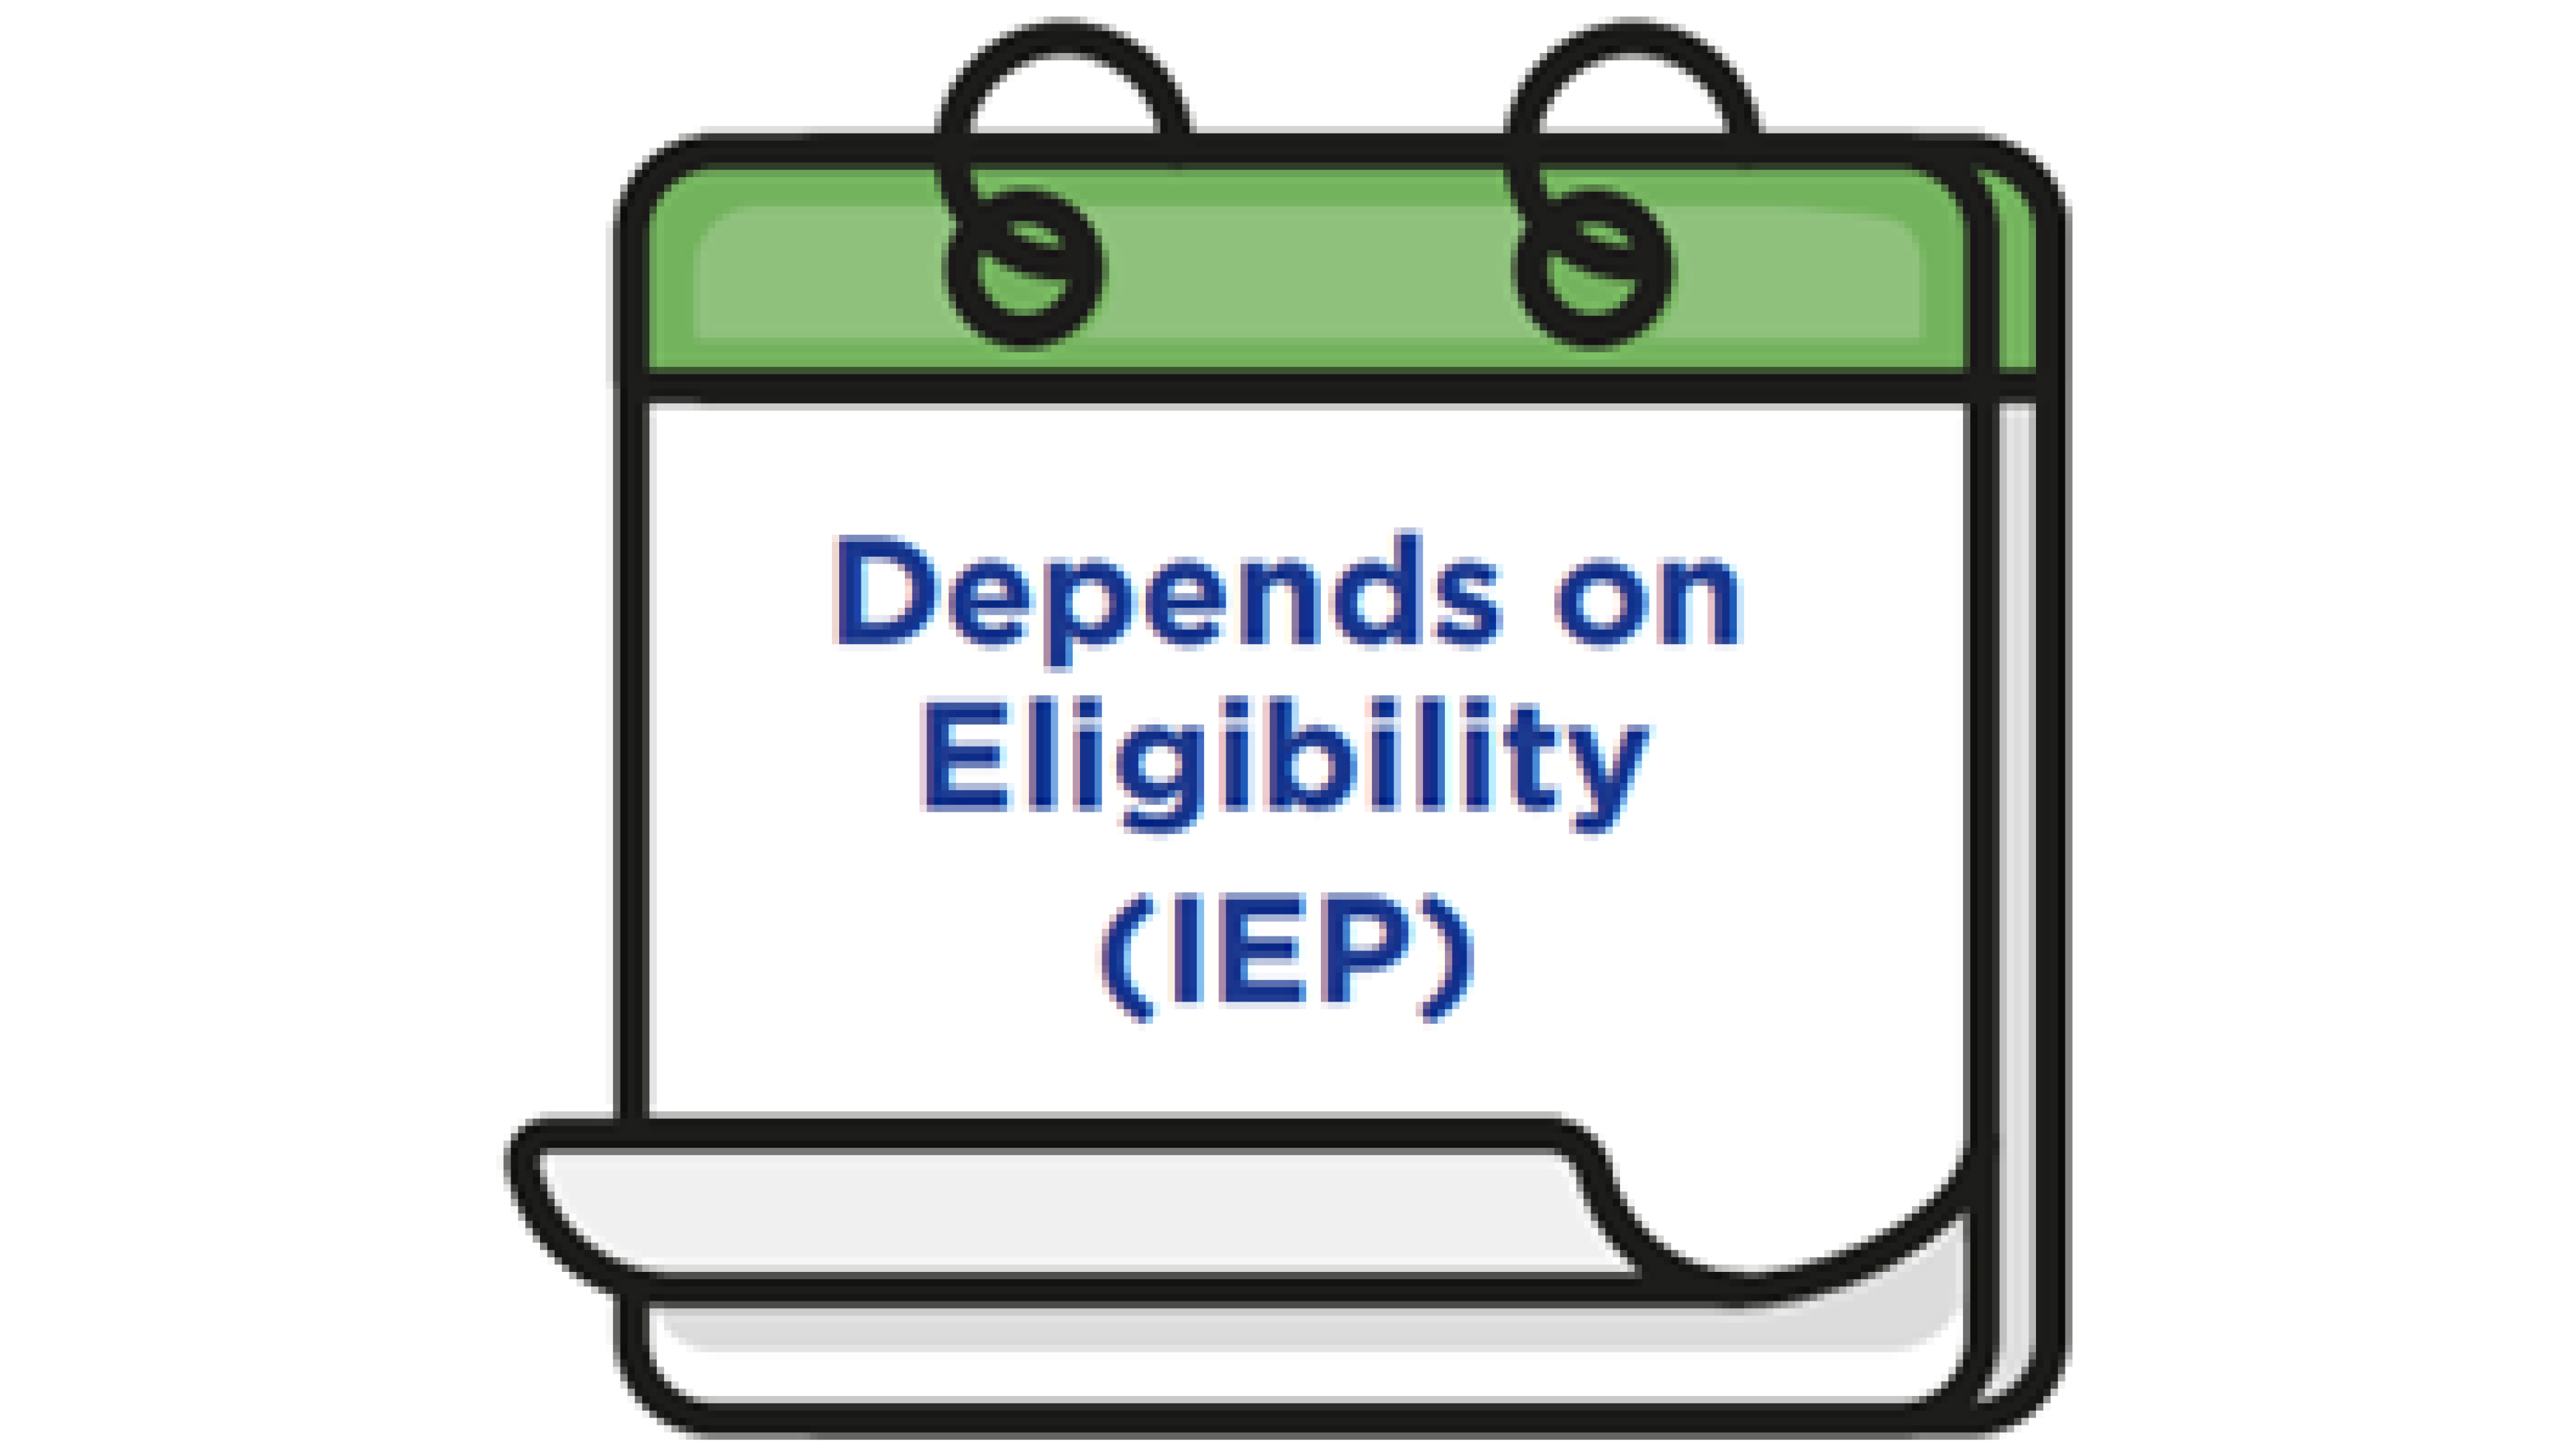 A calendar is shown with the text Depends on Eligibility (IEP).